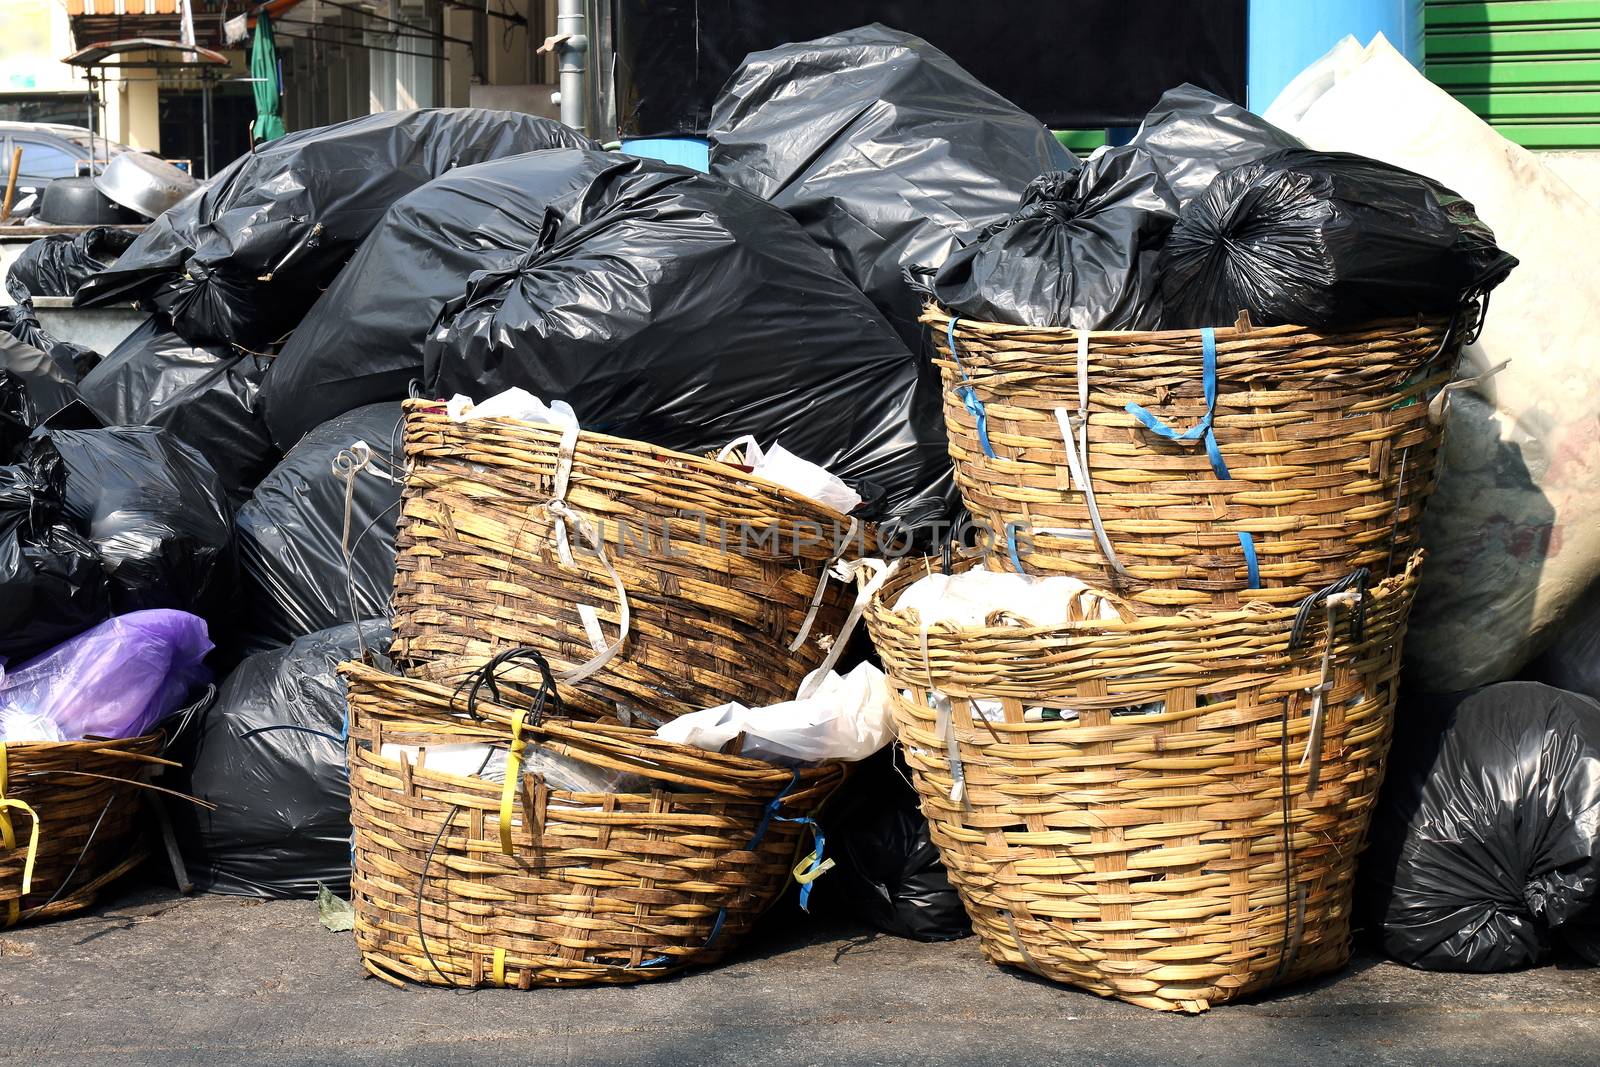 waste plastic junk in basket, pile garbage bamboo rattan baskets bags on the floor and many dump black plastic garbage bags